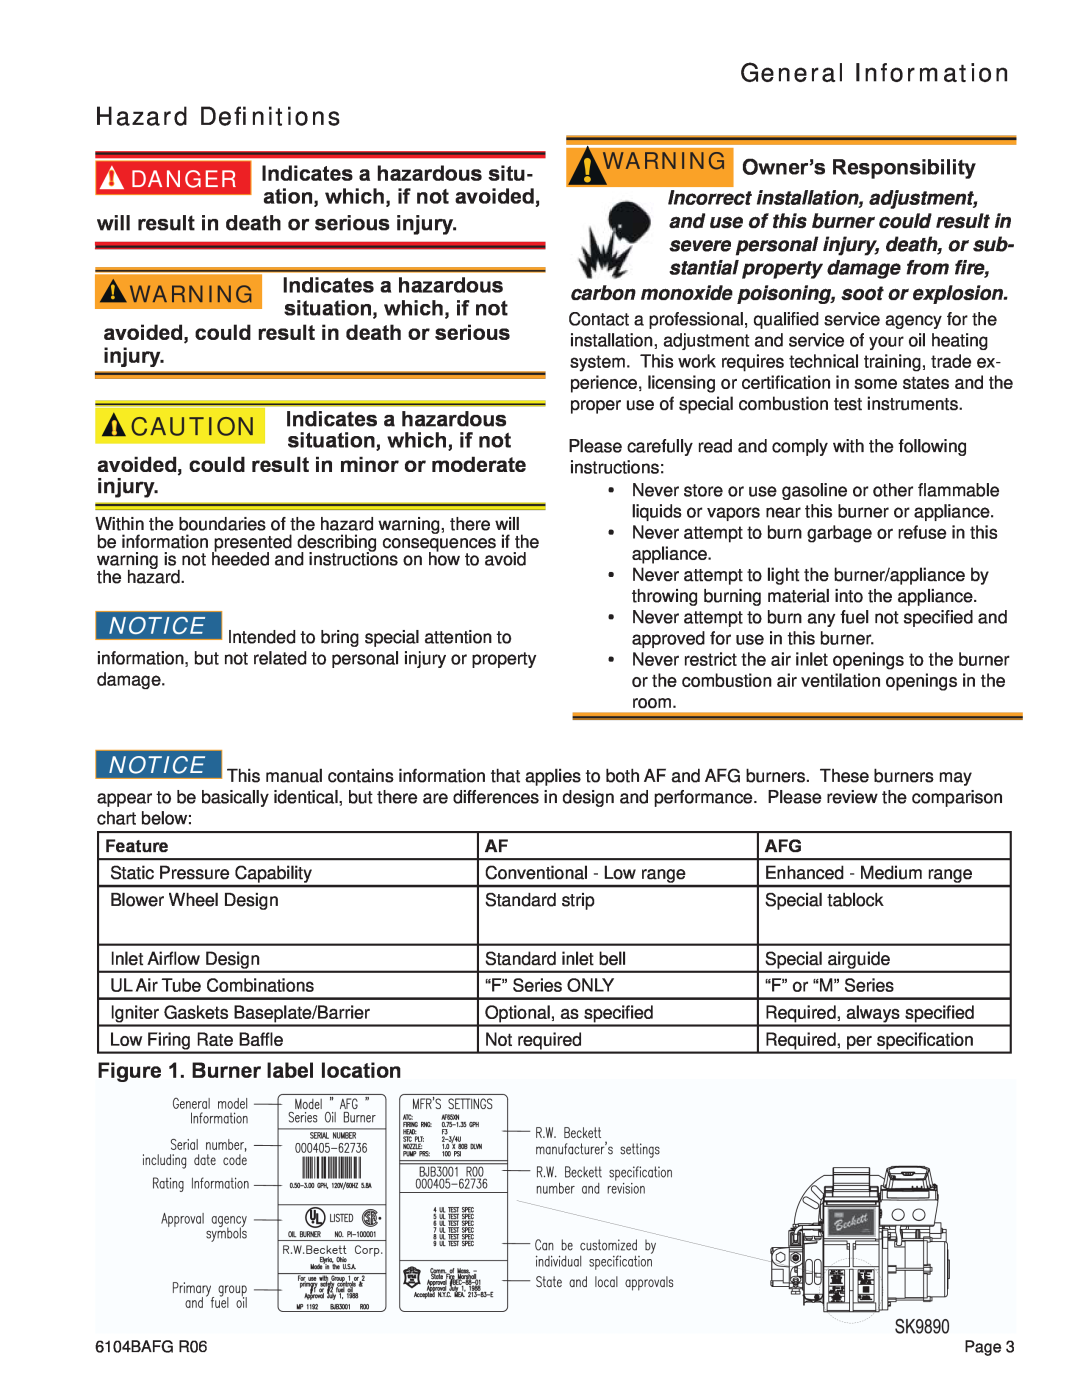 Weil-McLain UO-4 CV manual Hazard Deﬁnitions, General Information, Indicates a hazardous situ, ation, which, if not avoided 